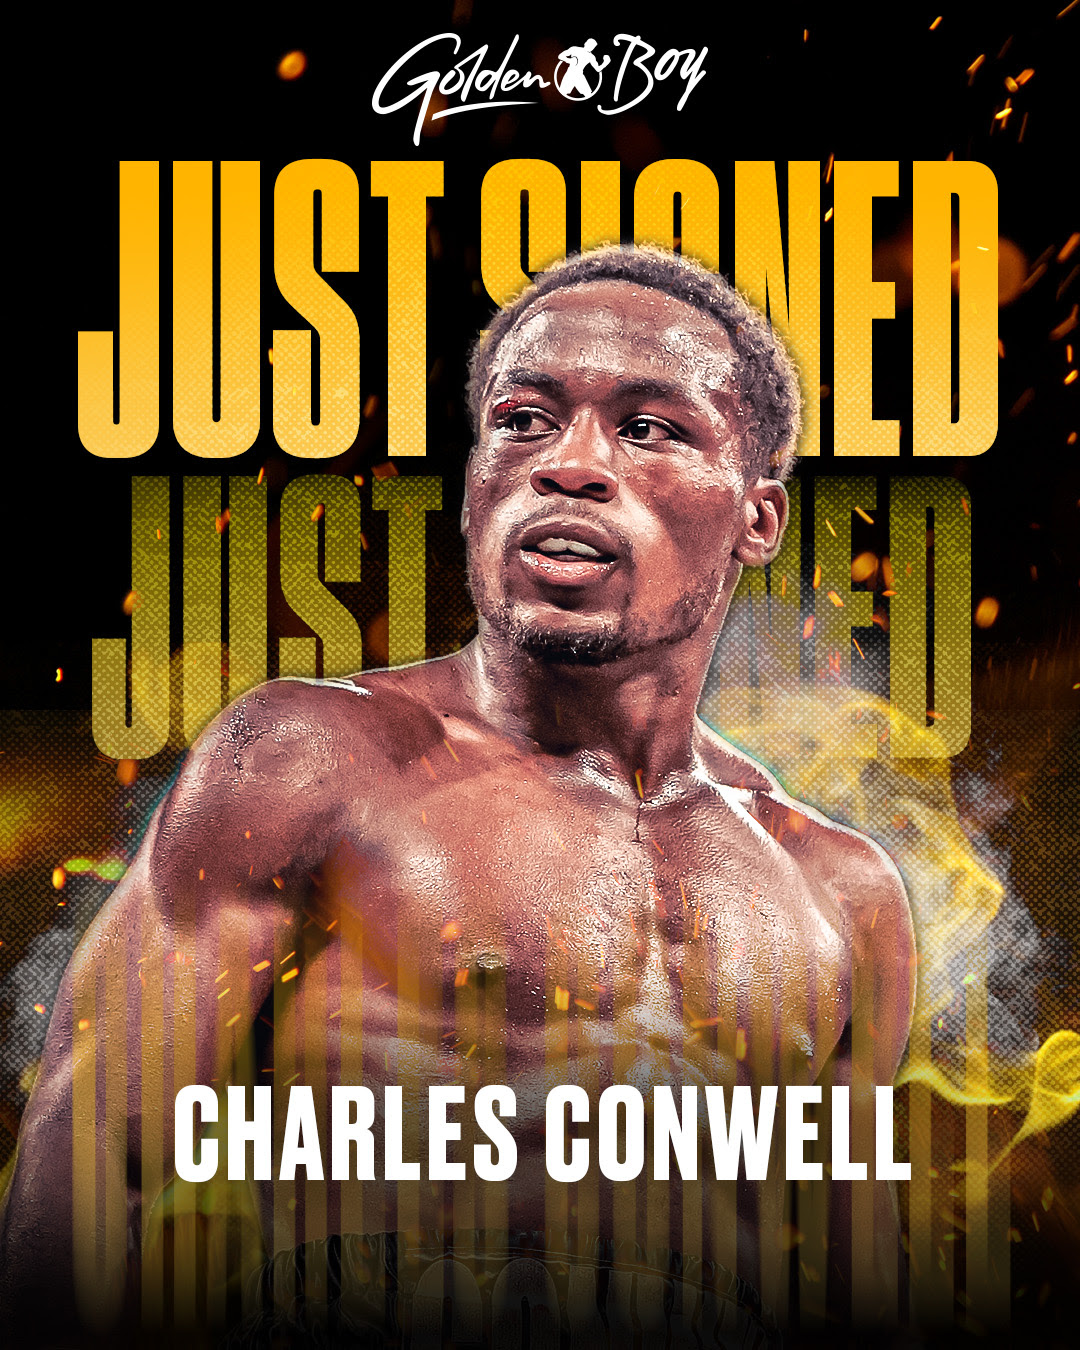 Conwell signs with Golden Boy Promotions